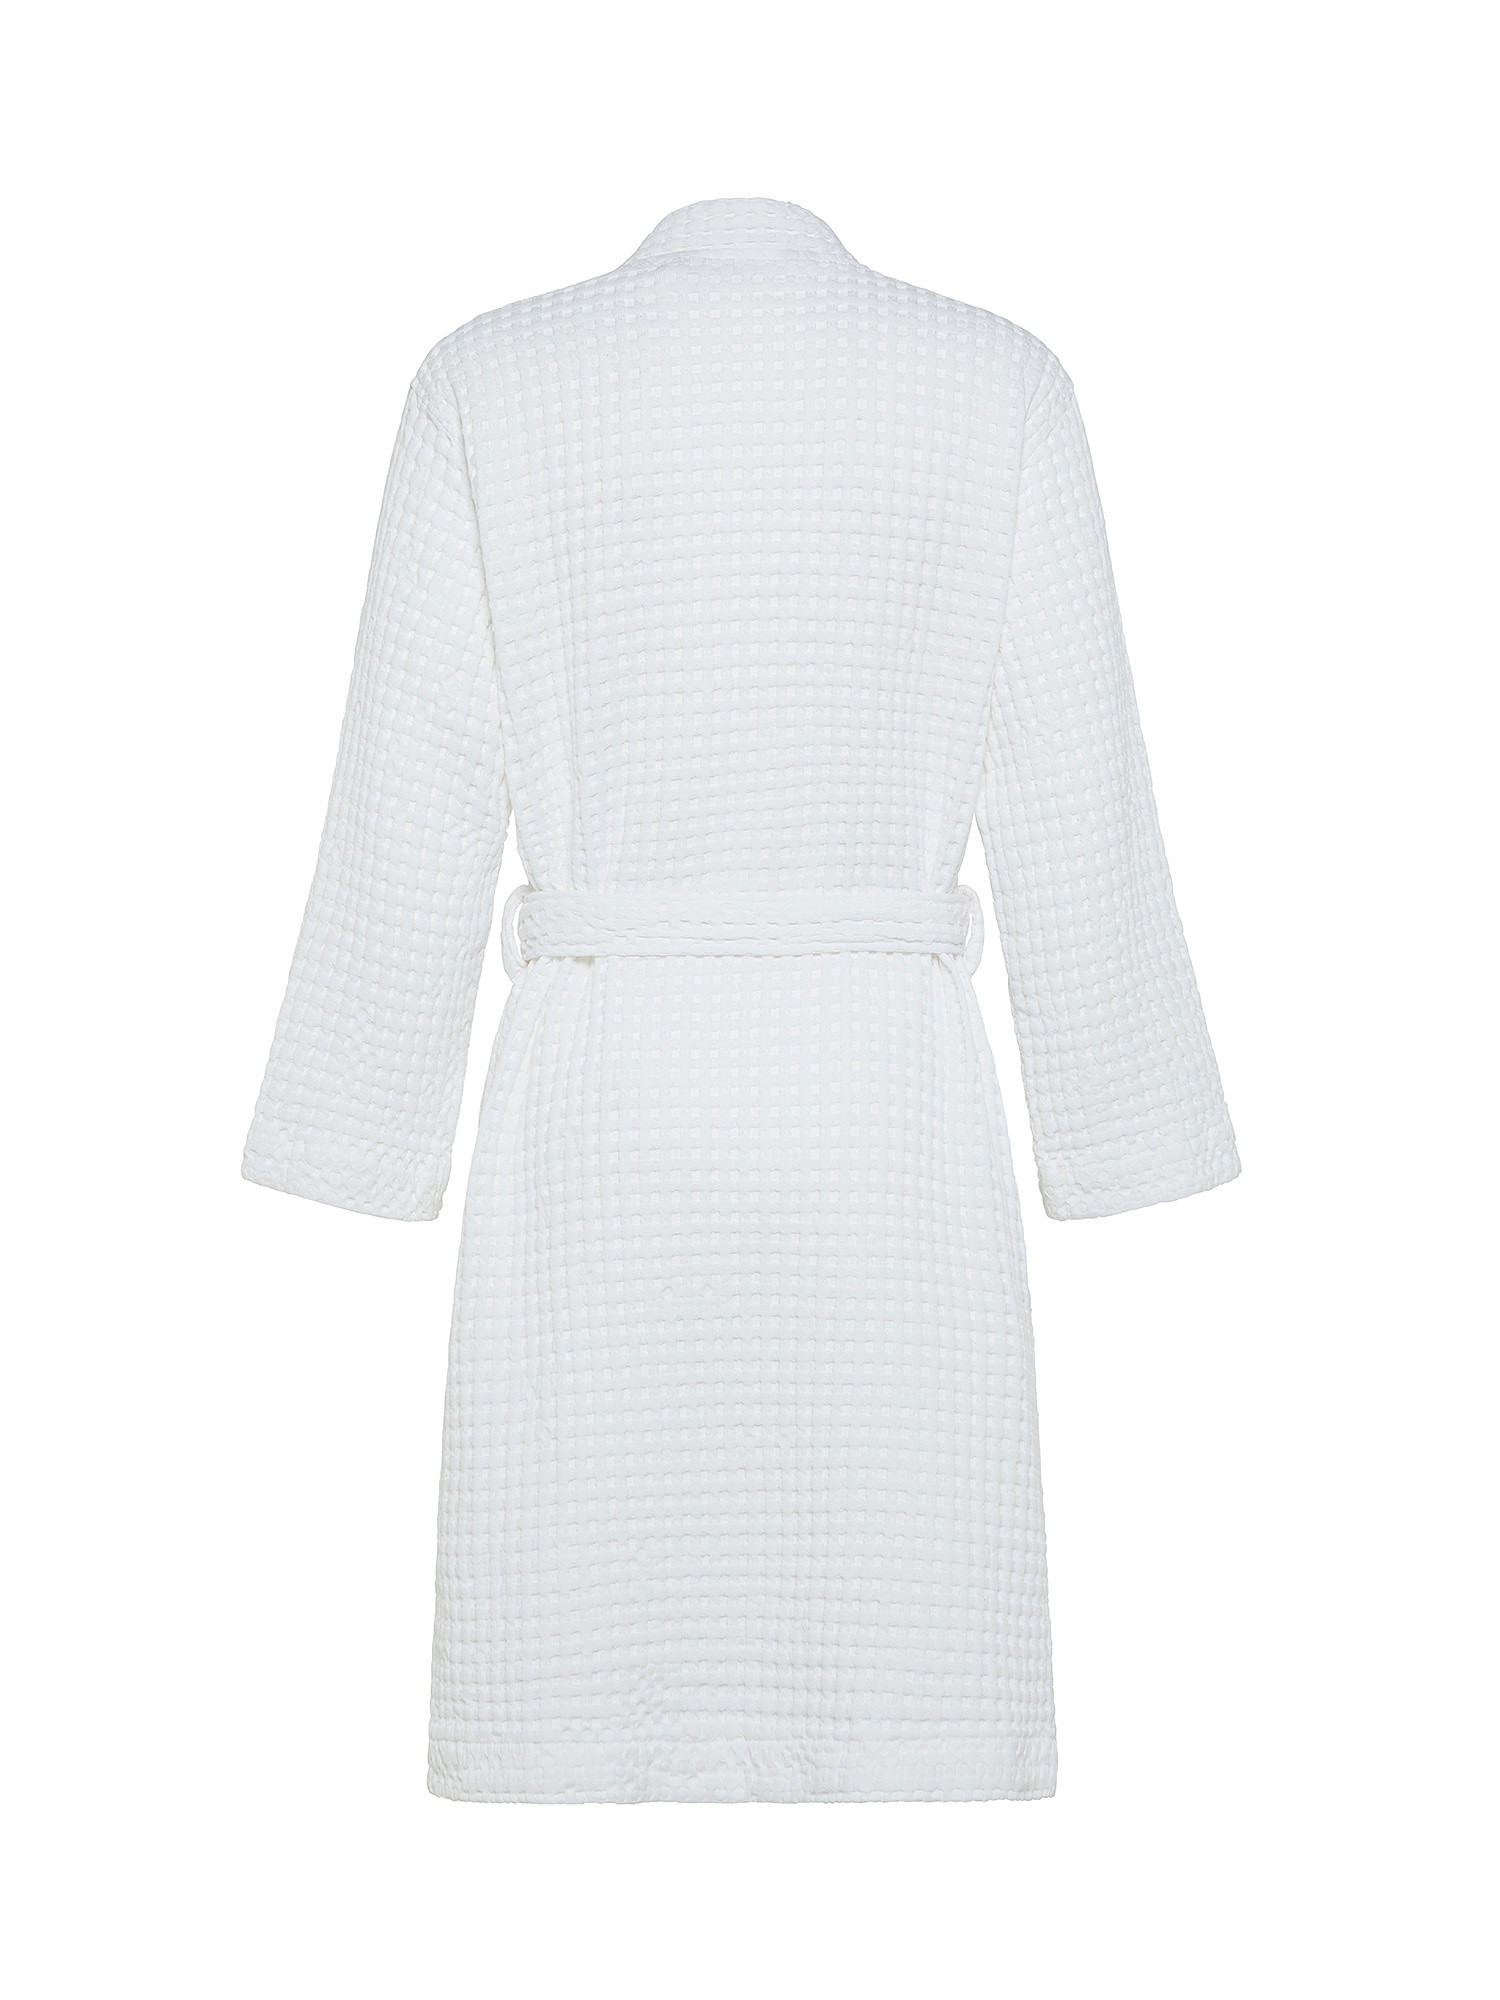 Bathrobe in pure honeycomb cotton, White, large image number 1